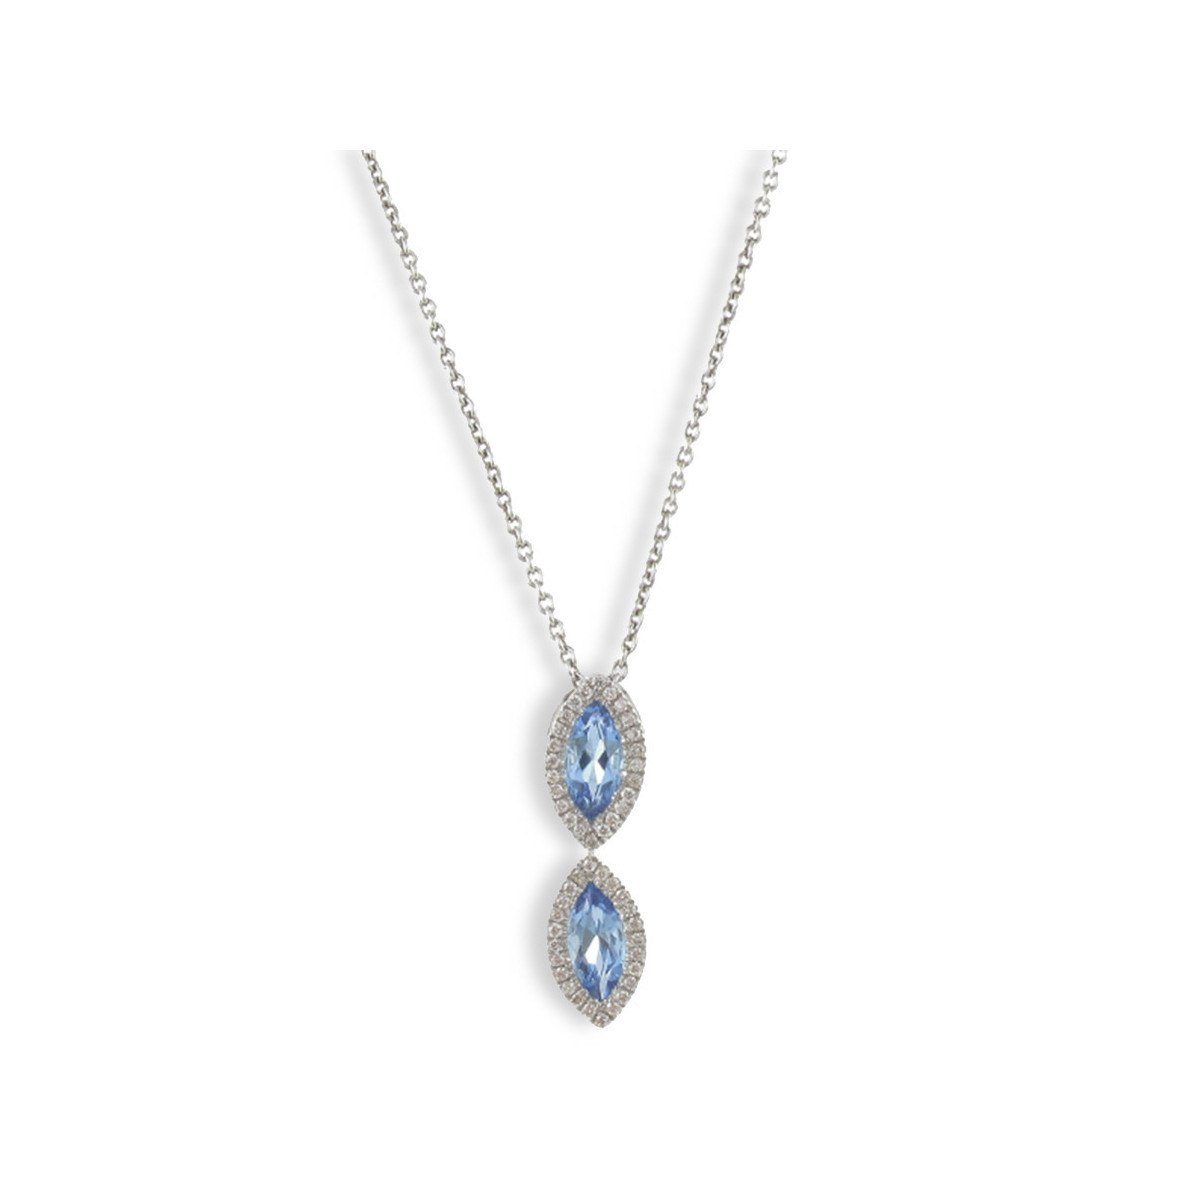 WHITE GOLD DIAMOND AND TOPAZ NECKLACE